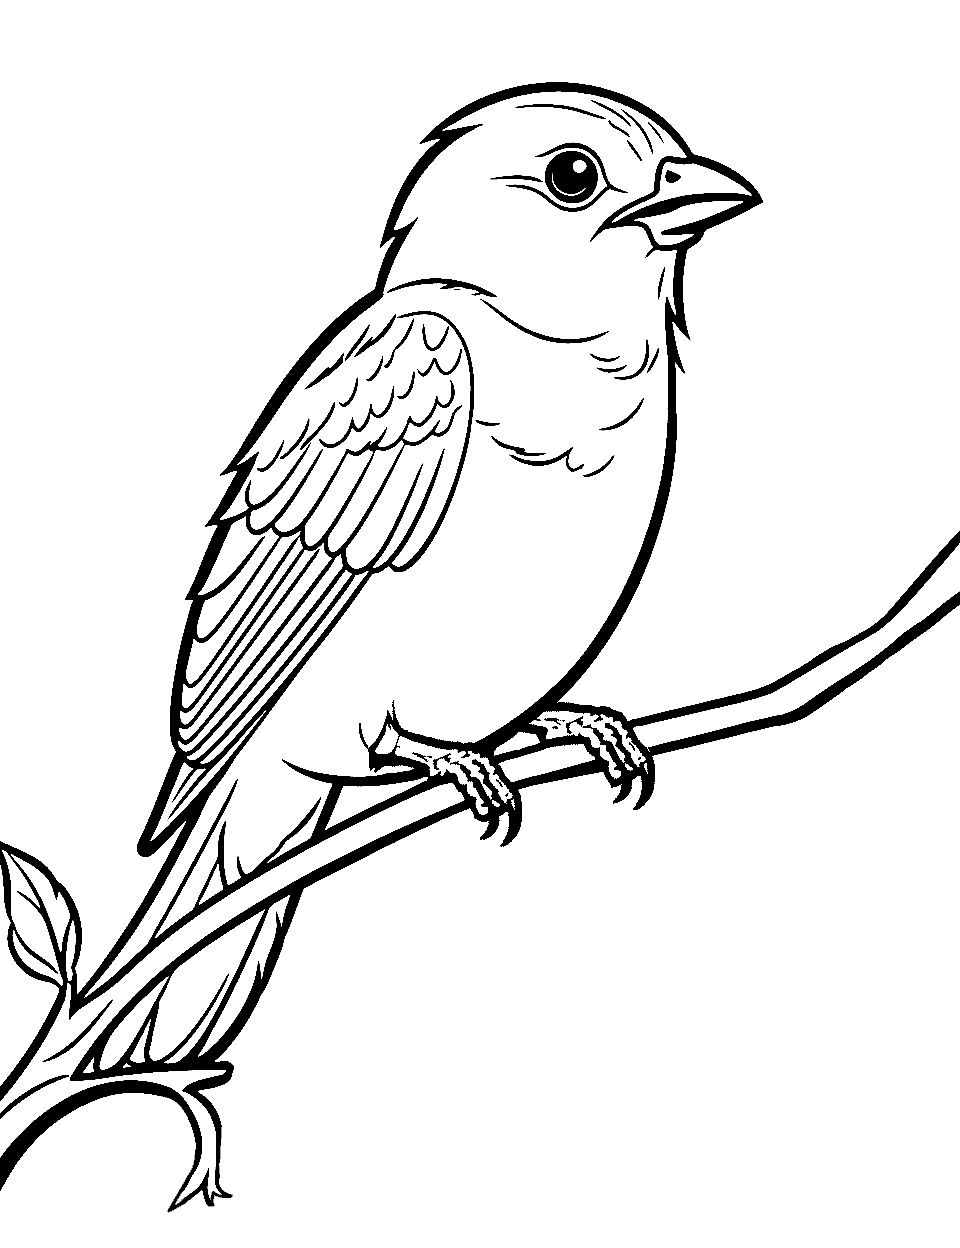 Sparrow's Morning Song Coloring Page - A sparrow perched on a branch, ready to sing its heart out.